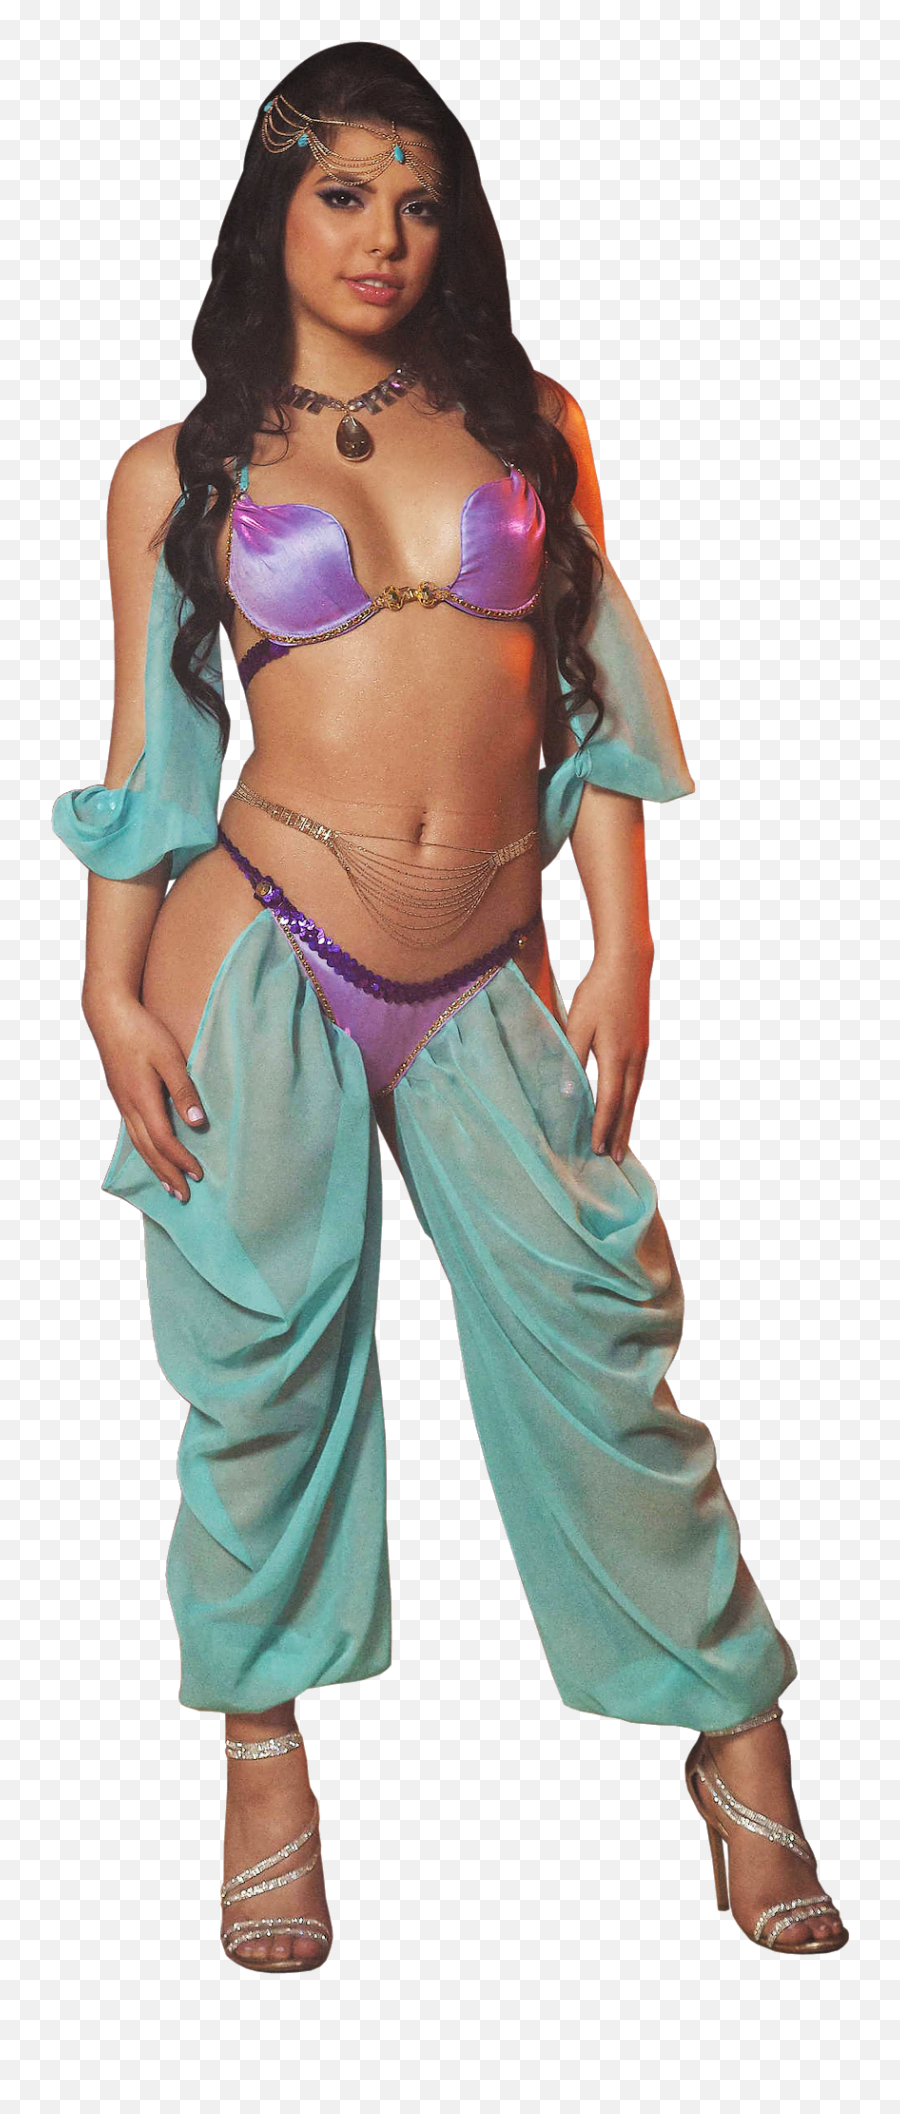 Download Gina Valentina Sexy Outfit Png Image For Free - Gina Valentina,Sexy Woman Png